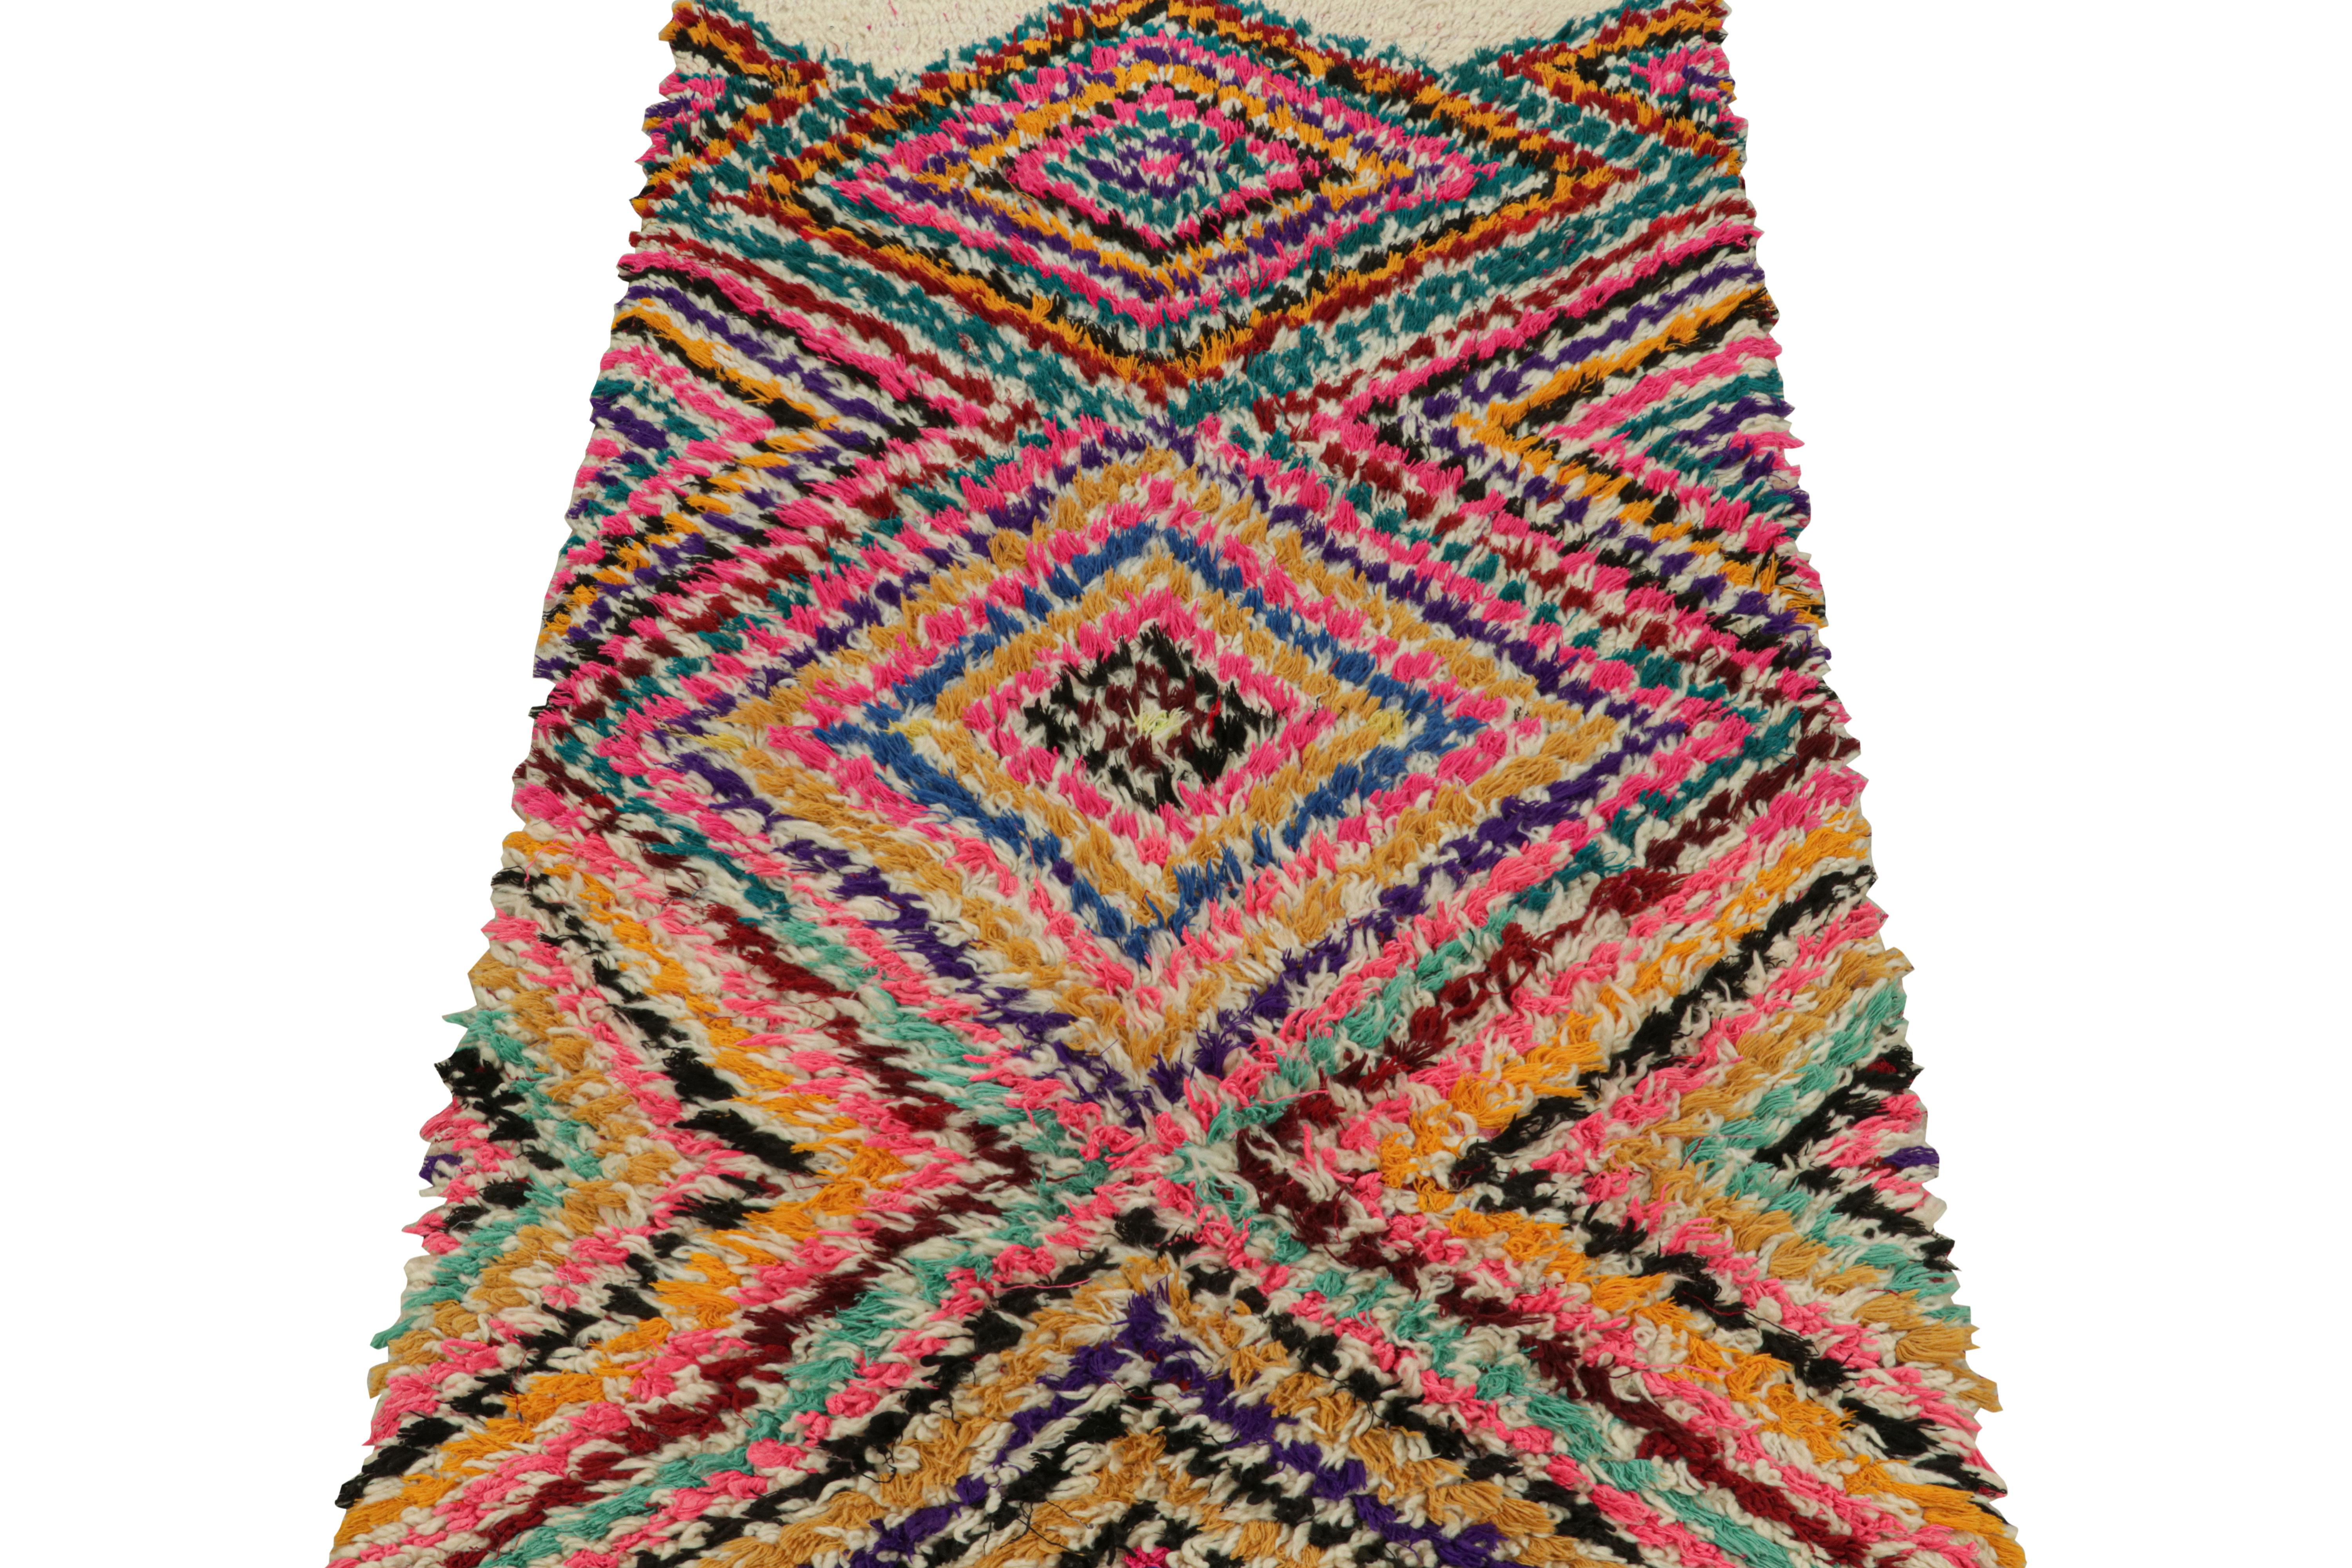 Hand-Knotted Vintage Moroccan Runner Rug with Polychrome Geometric Patterns from Rug & Kilim 